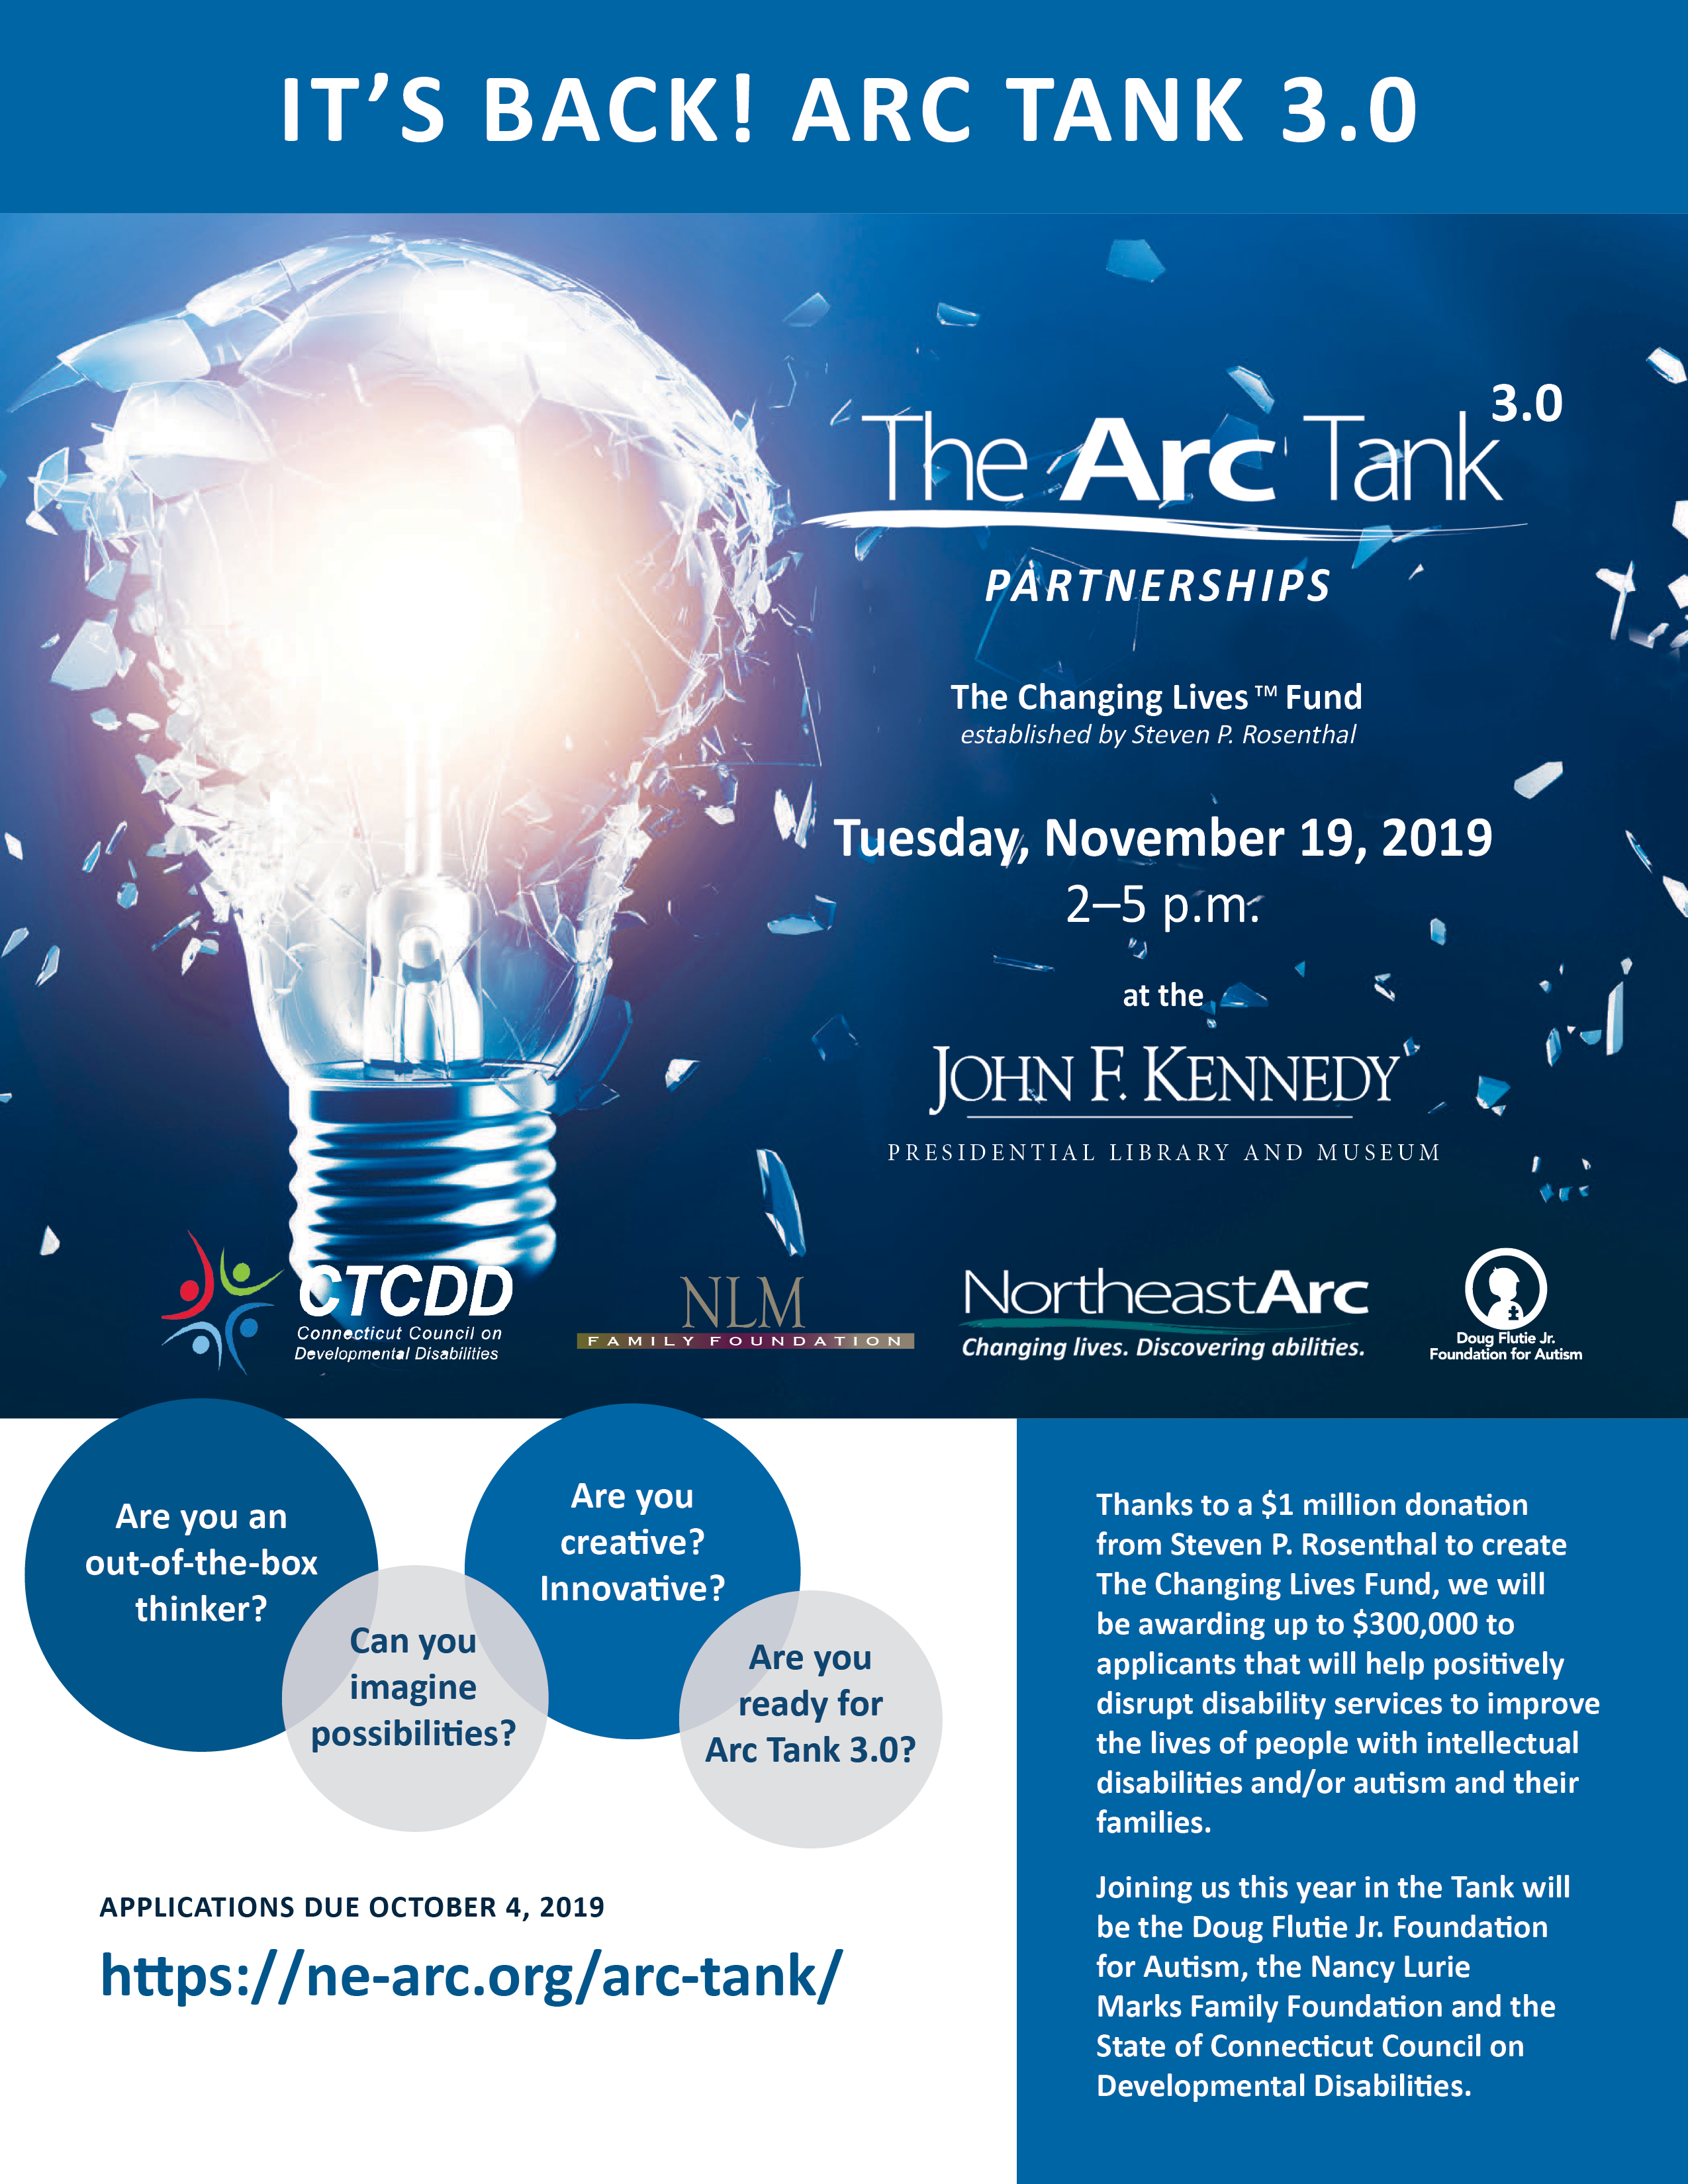 fcpas Client Northeast Arc To Harness Positive Disruptive Ideas With 3rd Annual Arc Tank fcpas